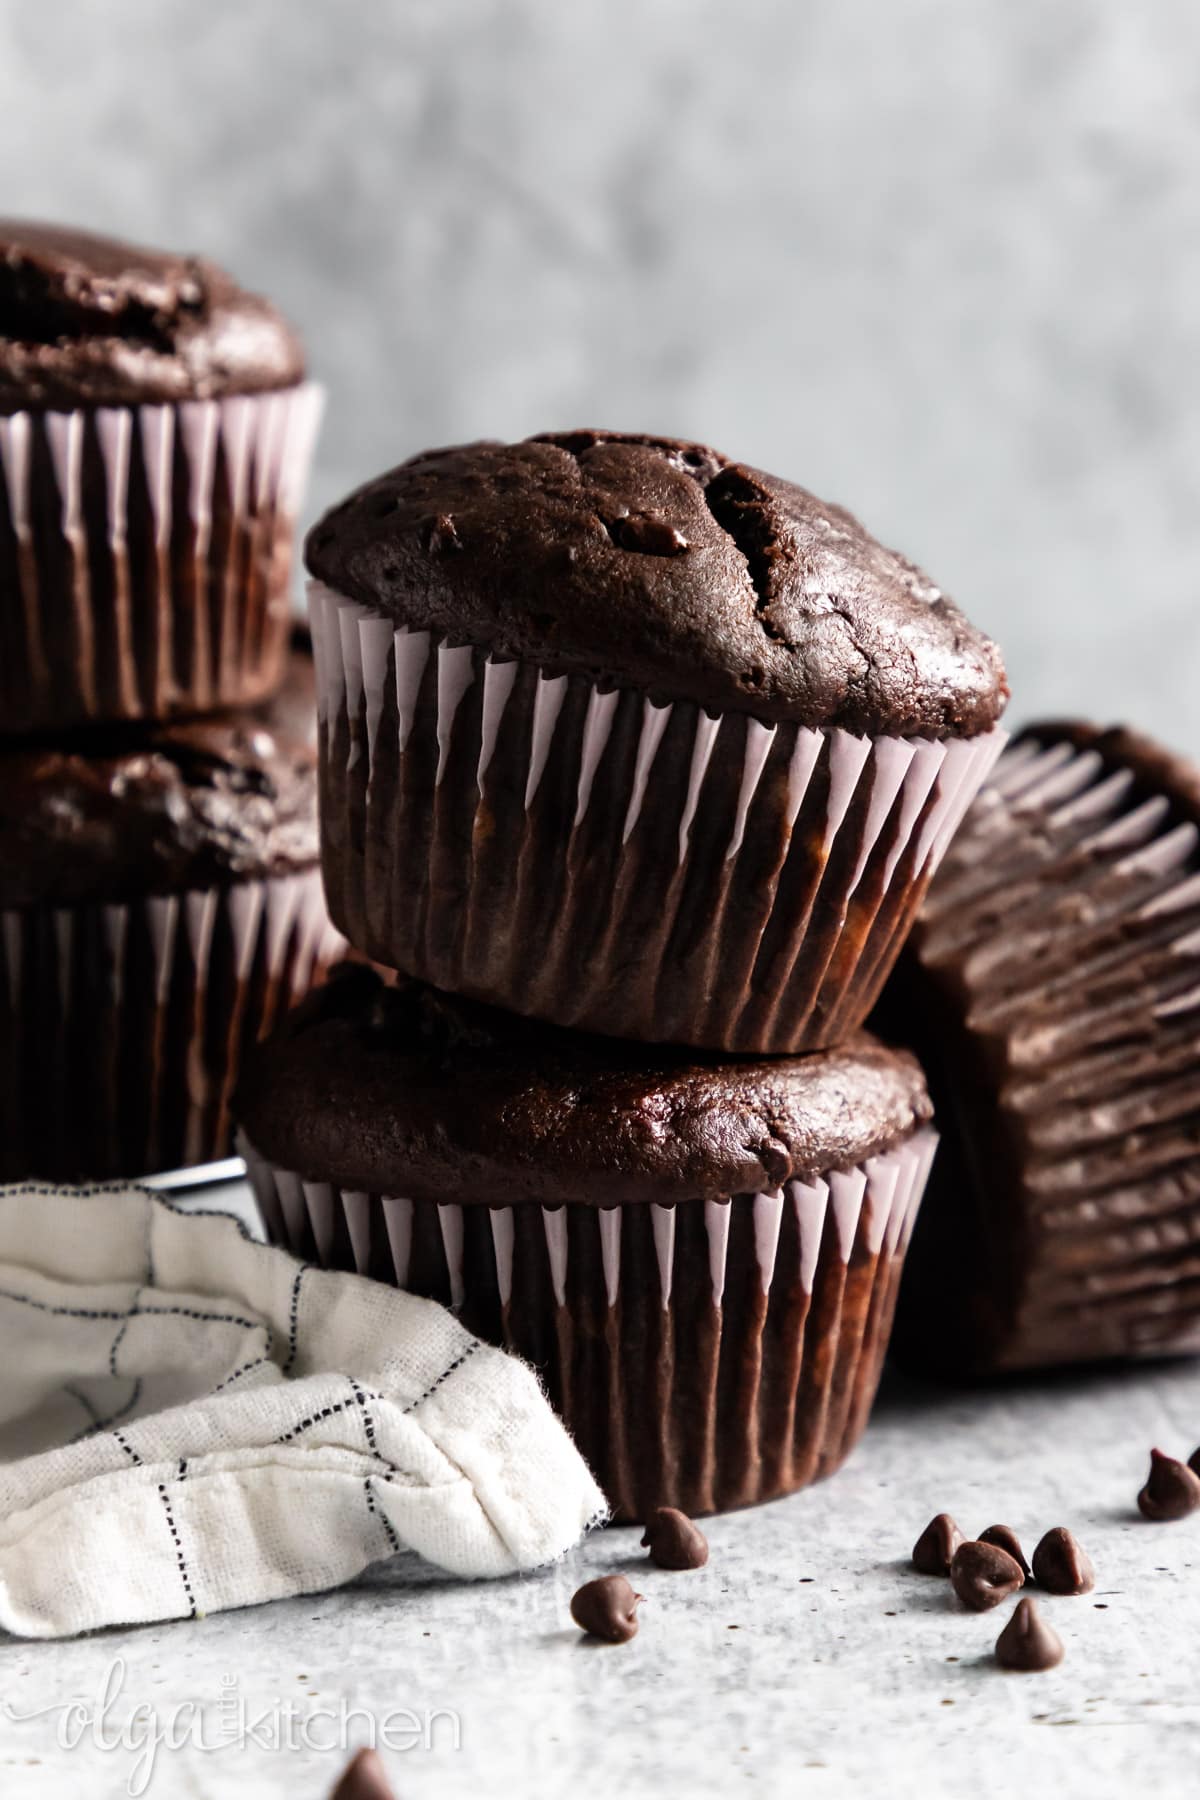 These Double Chocolate Banana Muffins are so easy to make, bursting with rich chocolate flavor and loaded with chocolate chips. They are soft and perfectly moist. #olgainthekitchen #bananamuffins #chocolatemuffins #muffins #chocolatebananamuffins #breakfast